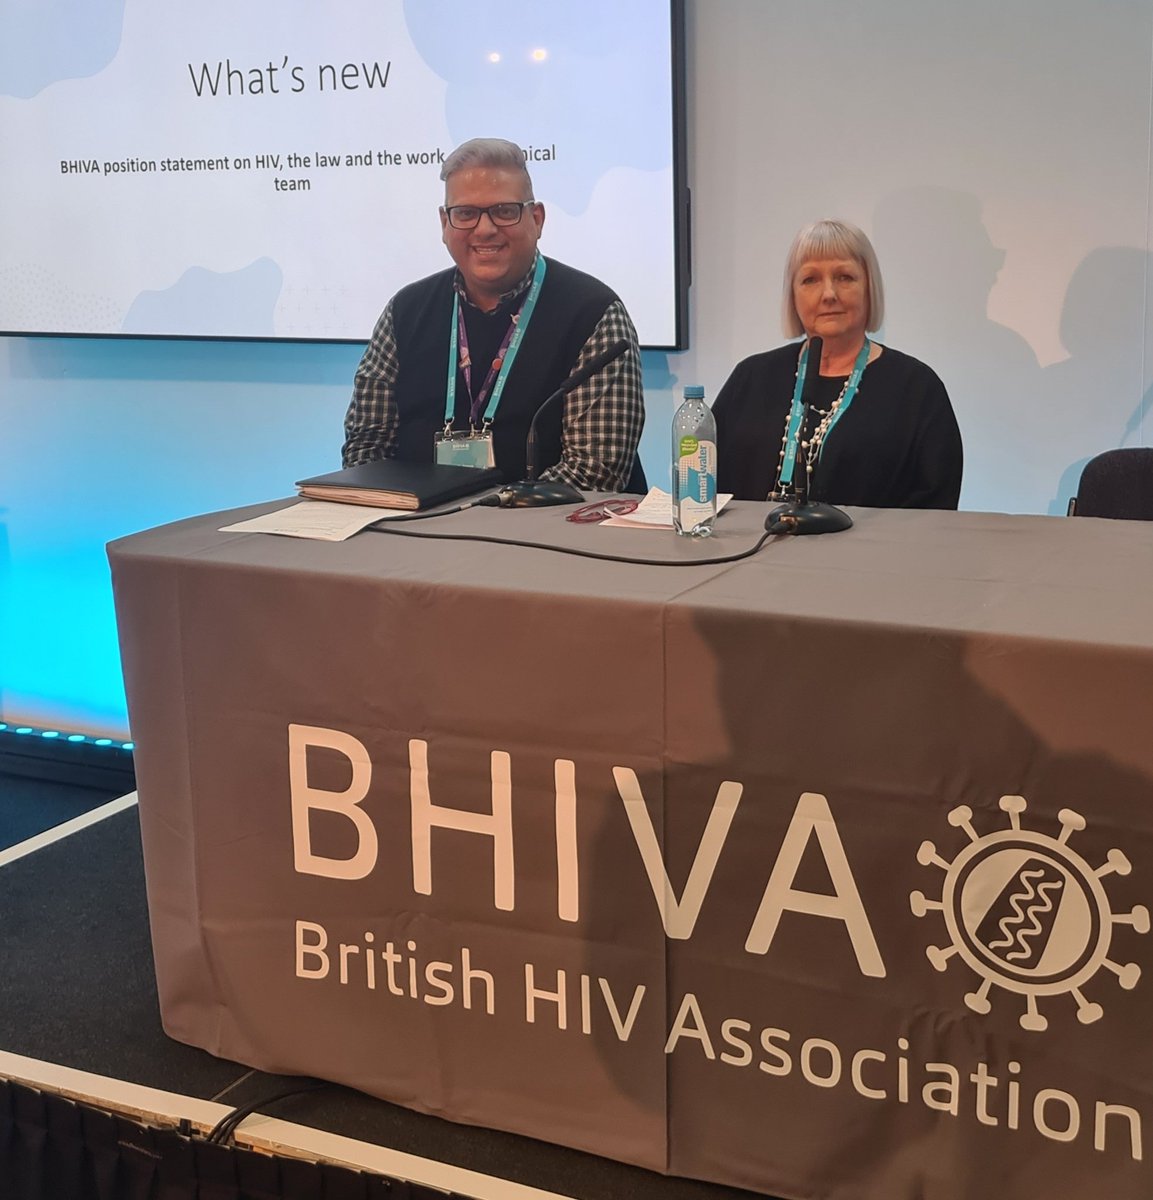 Sexual Health Manager Anthony Harrison-West with fellow panelist Anne Glew from @_thebrunswick_ have just completed their panel discussion for @HIVPreventionEn at #BHIVA22 'building closer ties between HPE and clinicians' pic.twitter.com/Xc6zJ3OIia